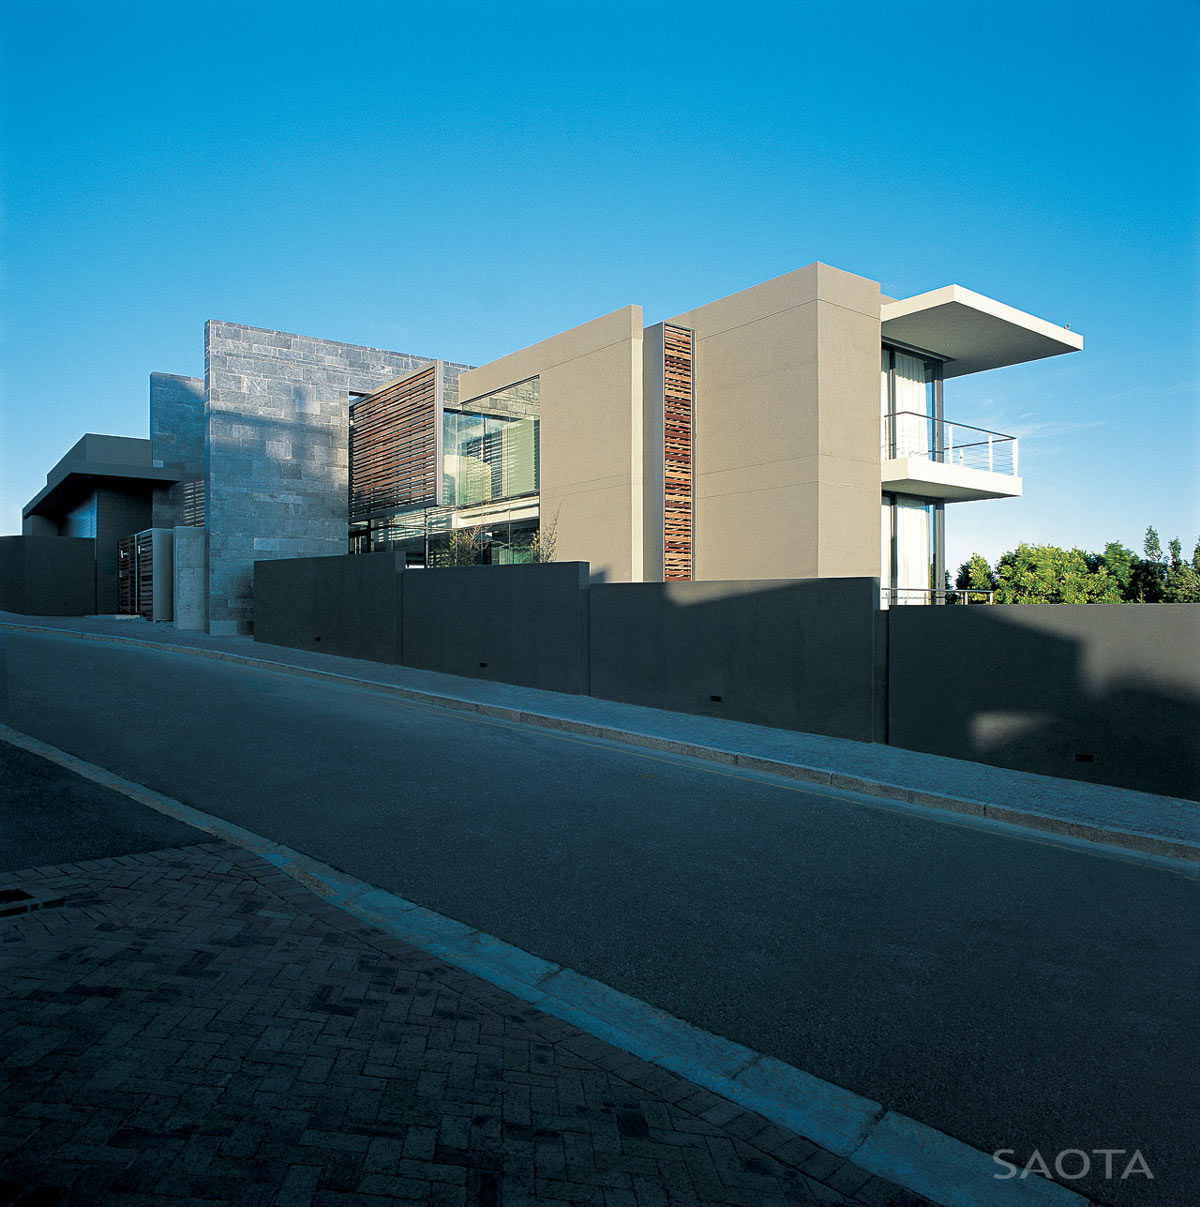 St Leon 10 in Cape Town, South Africa by SAOTA and Antoni Associates